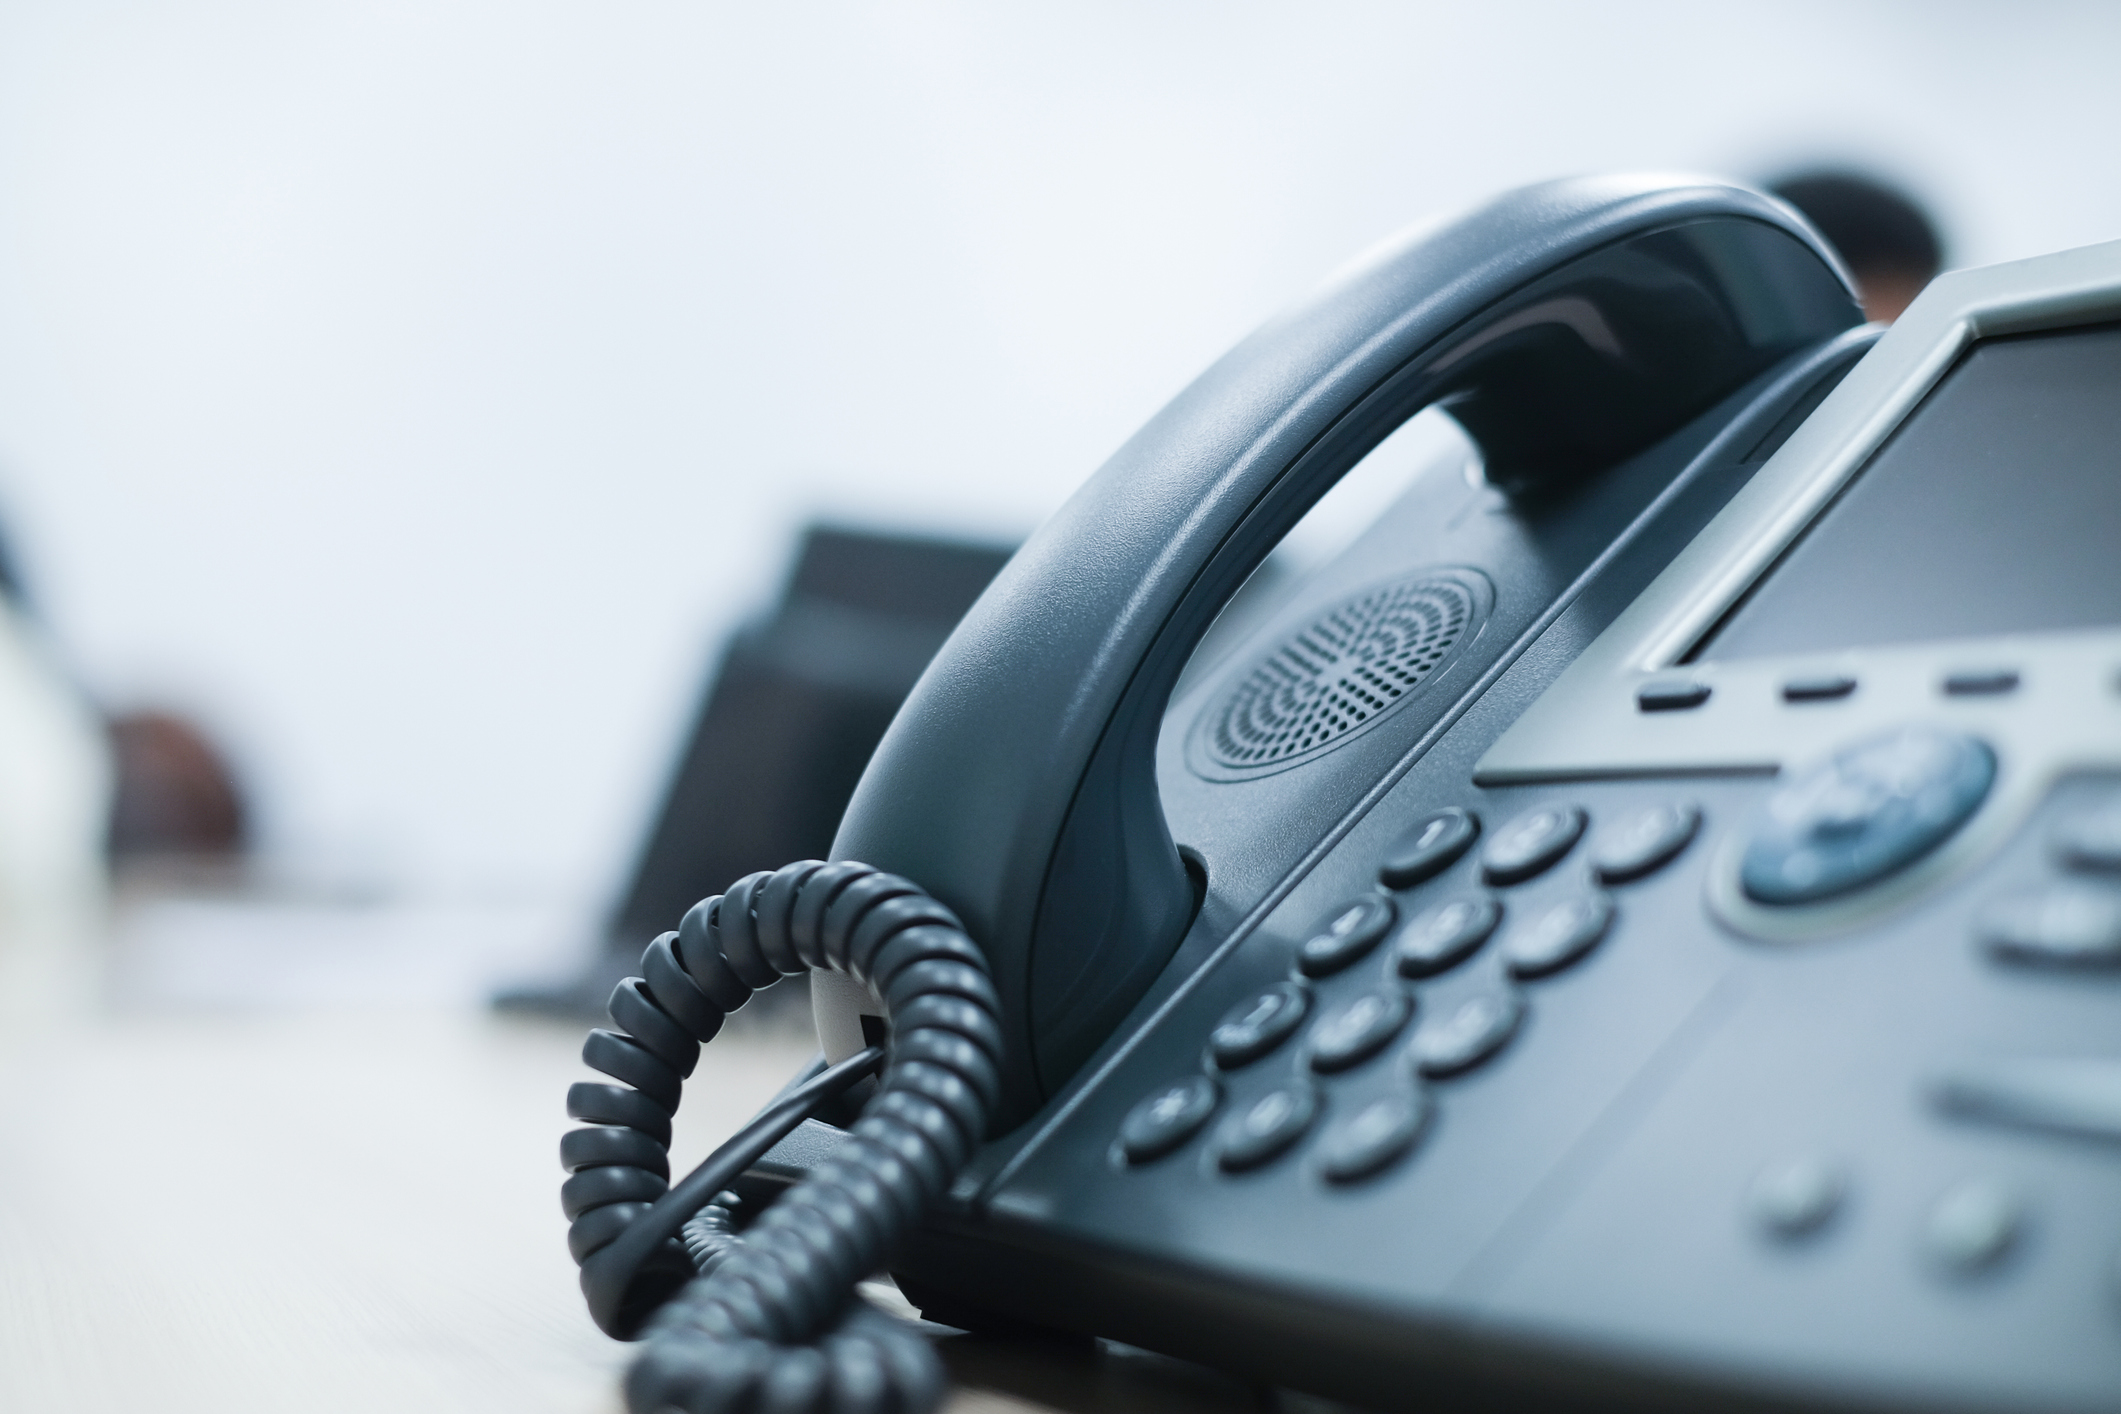 Protecting your business phone system